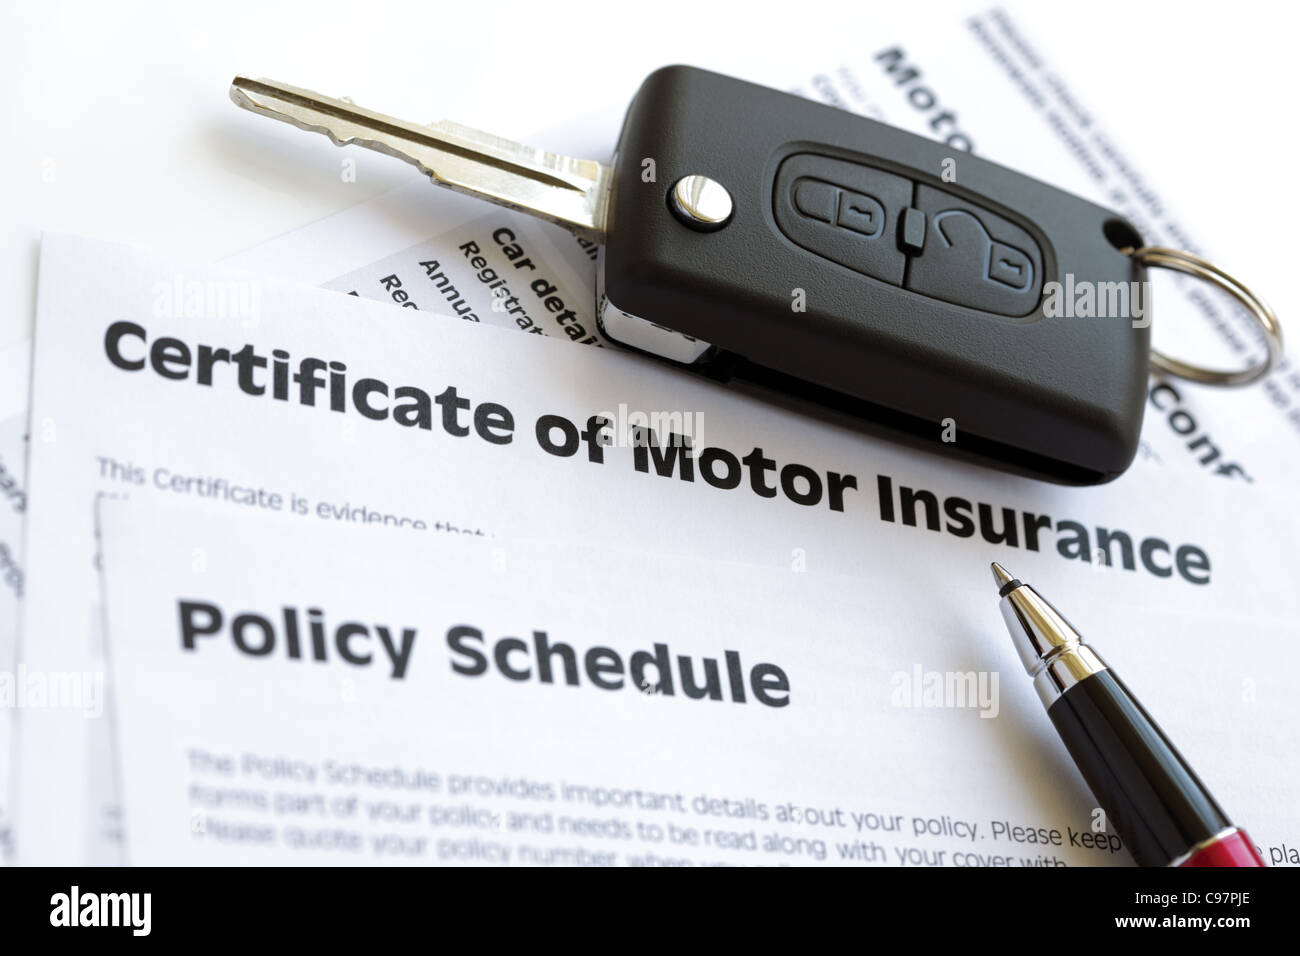 Motor insurance certificate with car key Stock Photo